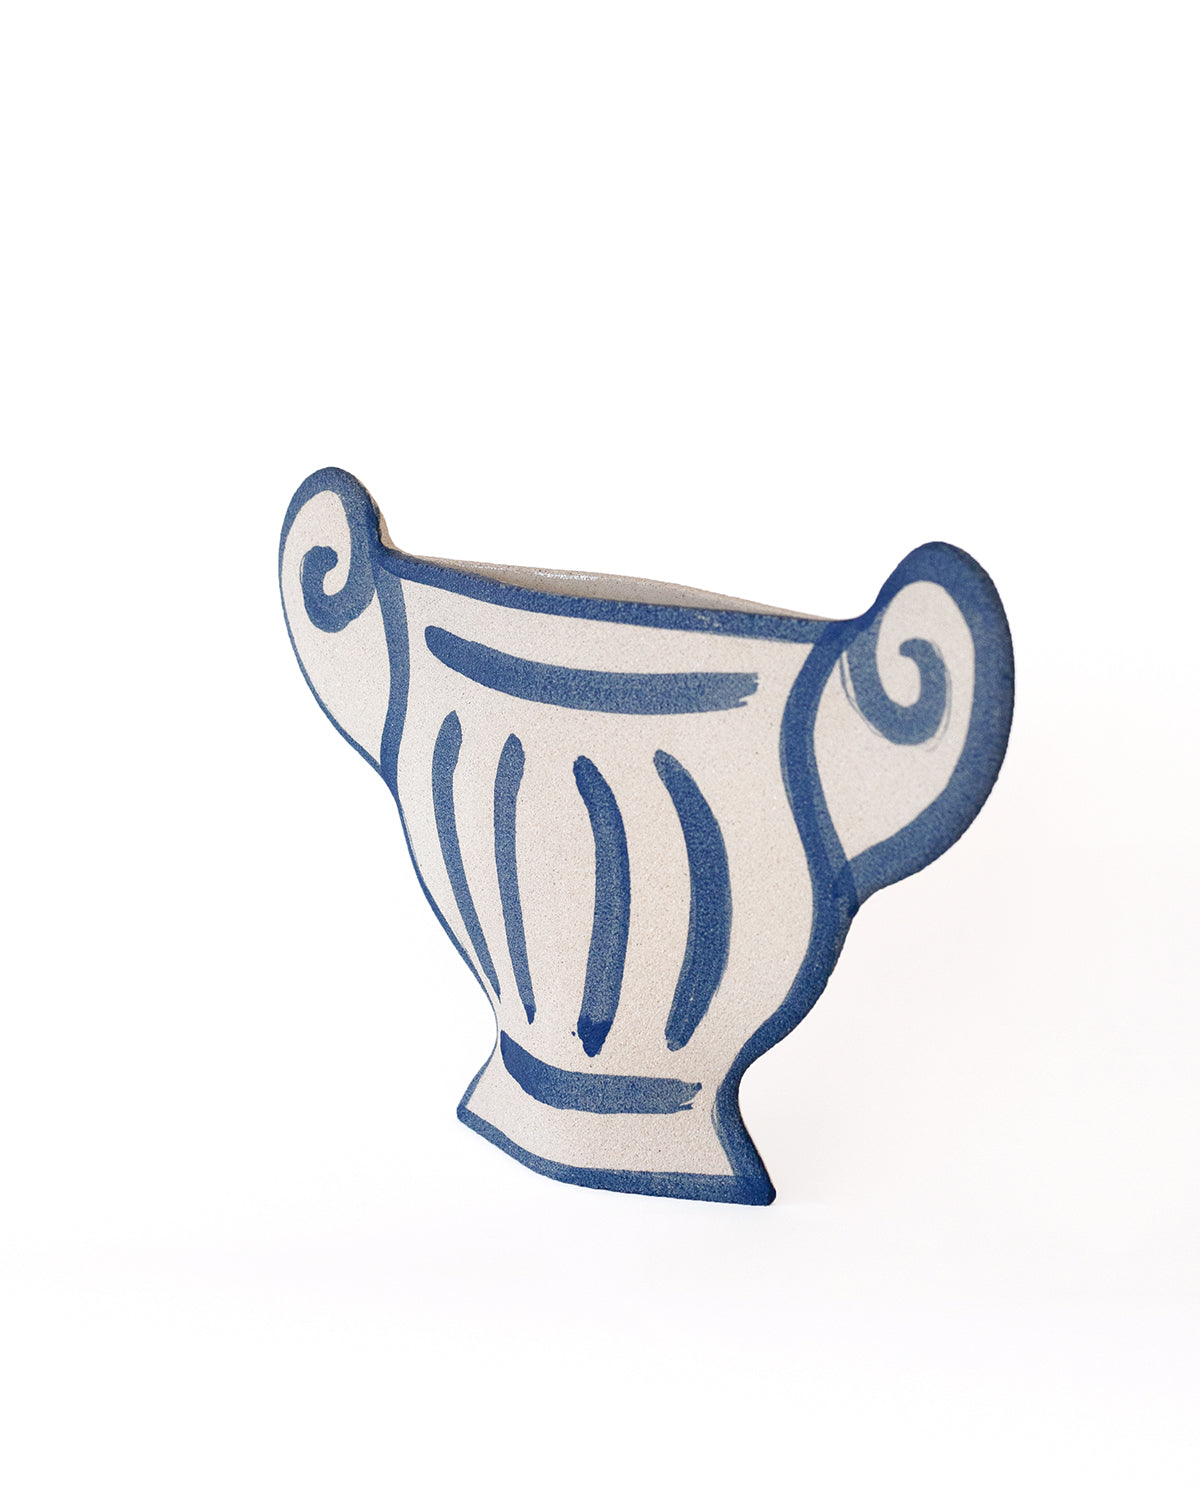 Hand-painted greek vase by INI CERAMIQUE with geometric patterns and textured finish